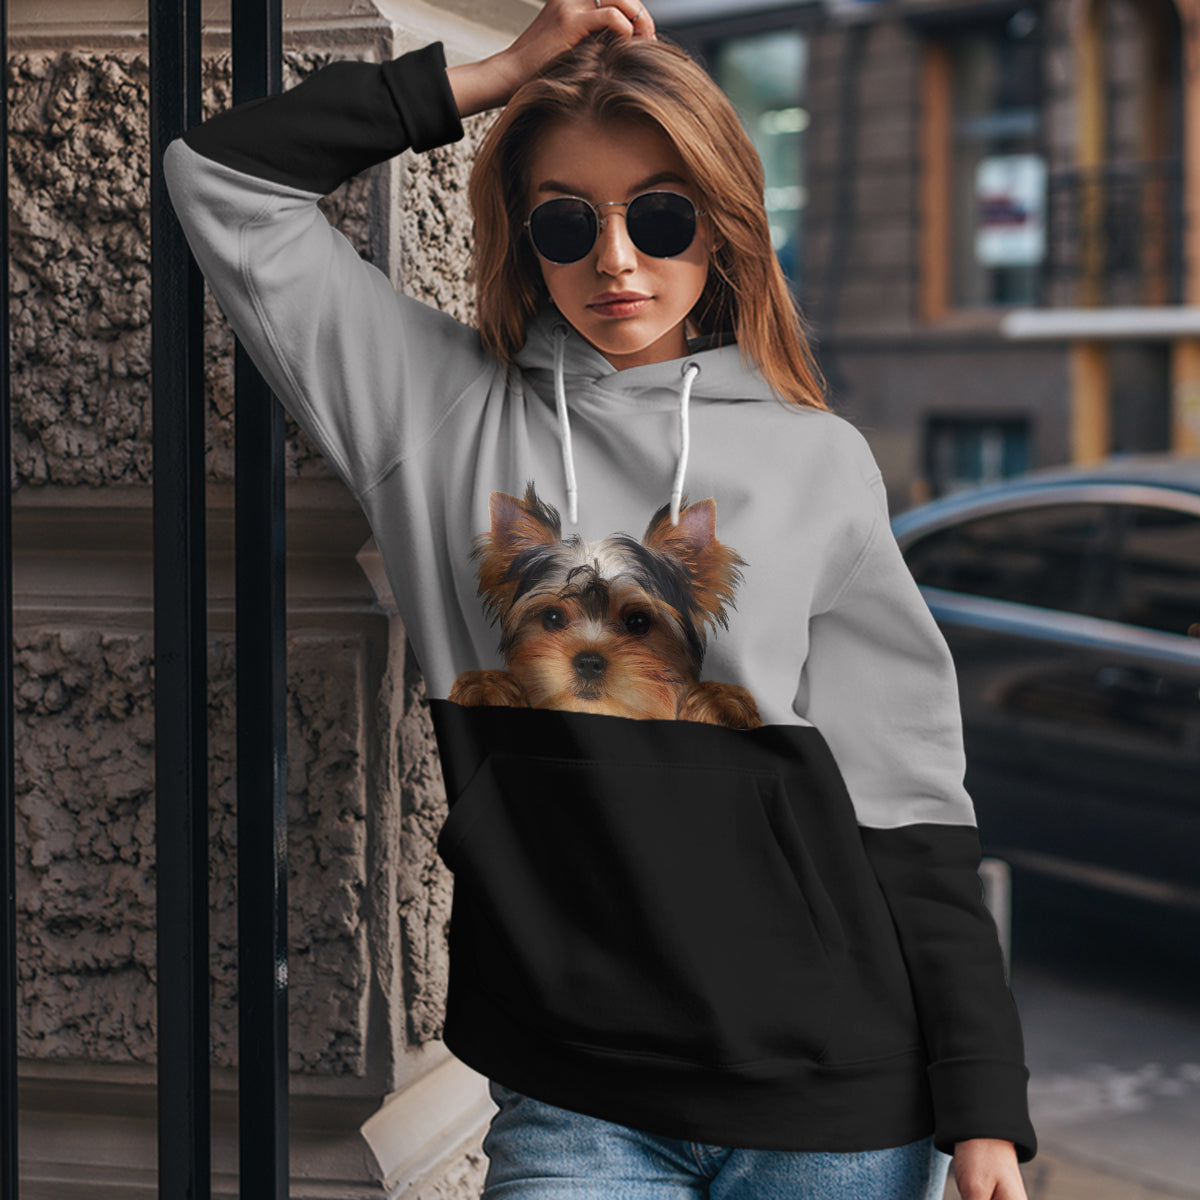 Can You See Me - Yorkshire Terrier Hoodie V2